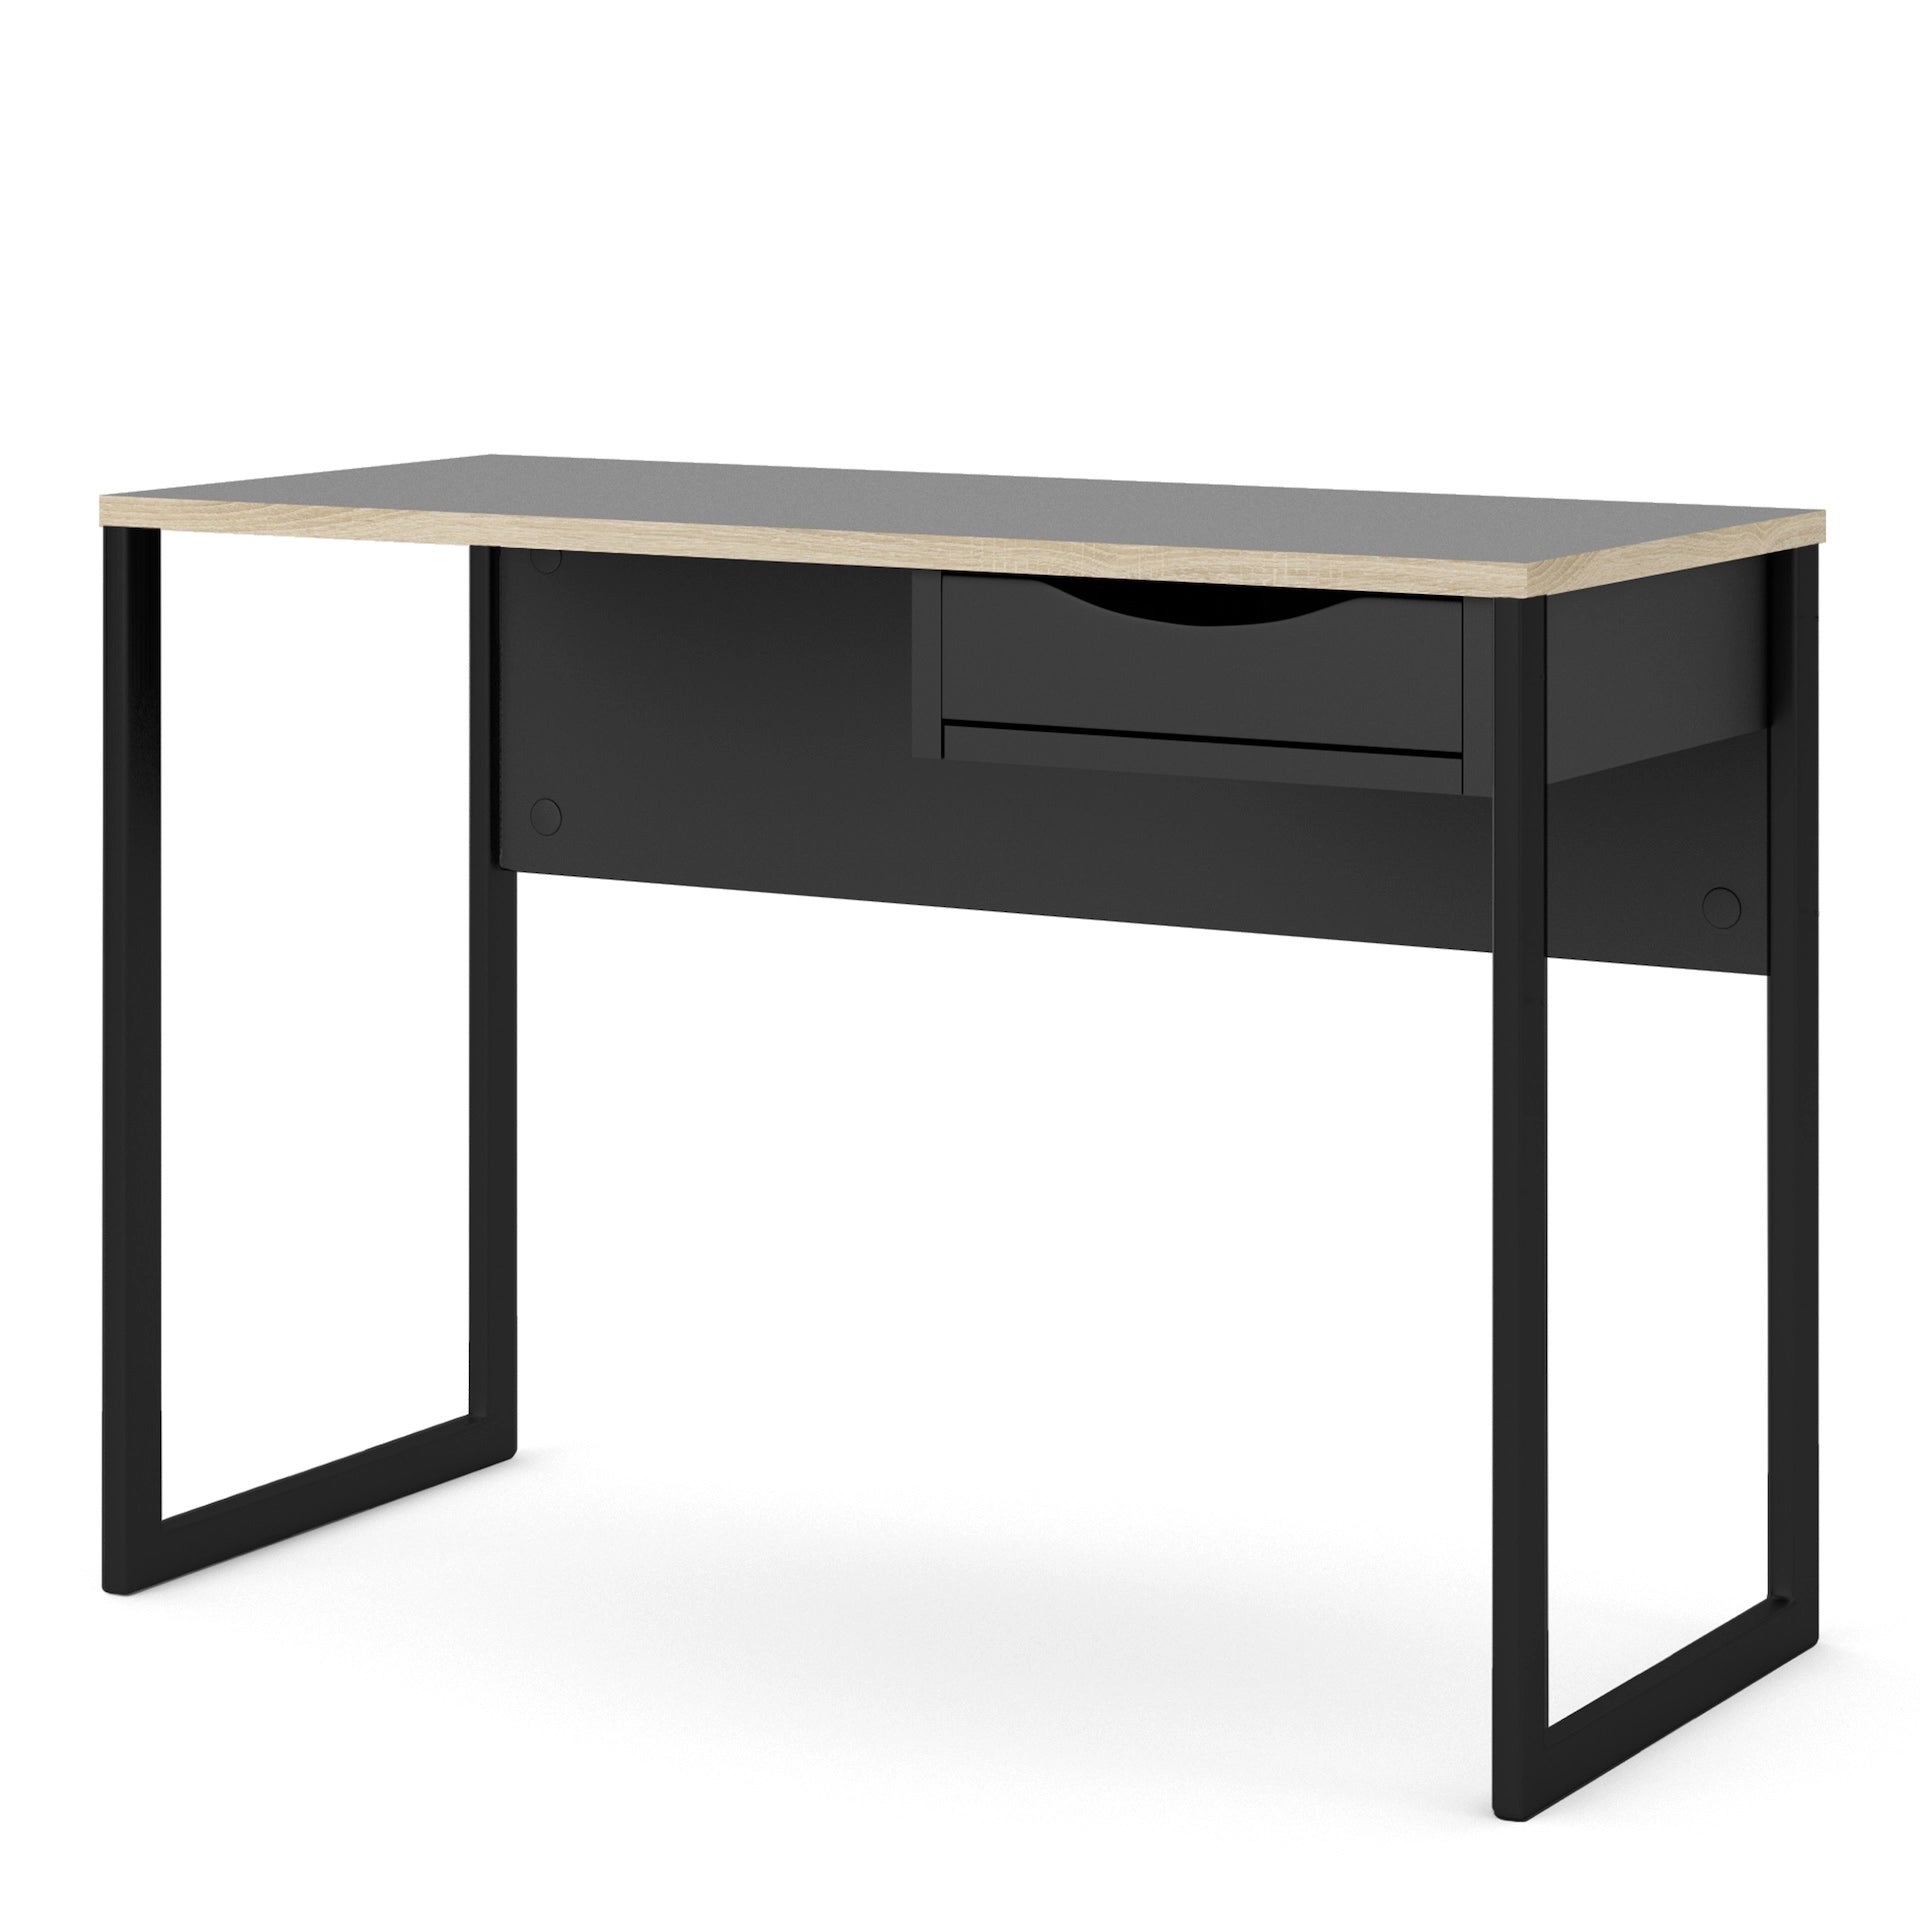 Furniture To Go Function Plus Desk 1 Drawer in Black with Oak Trim